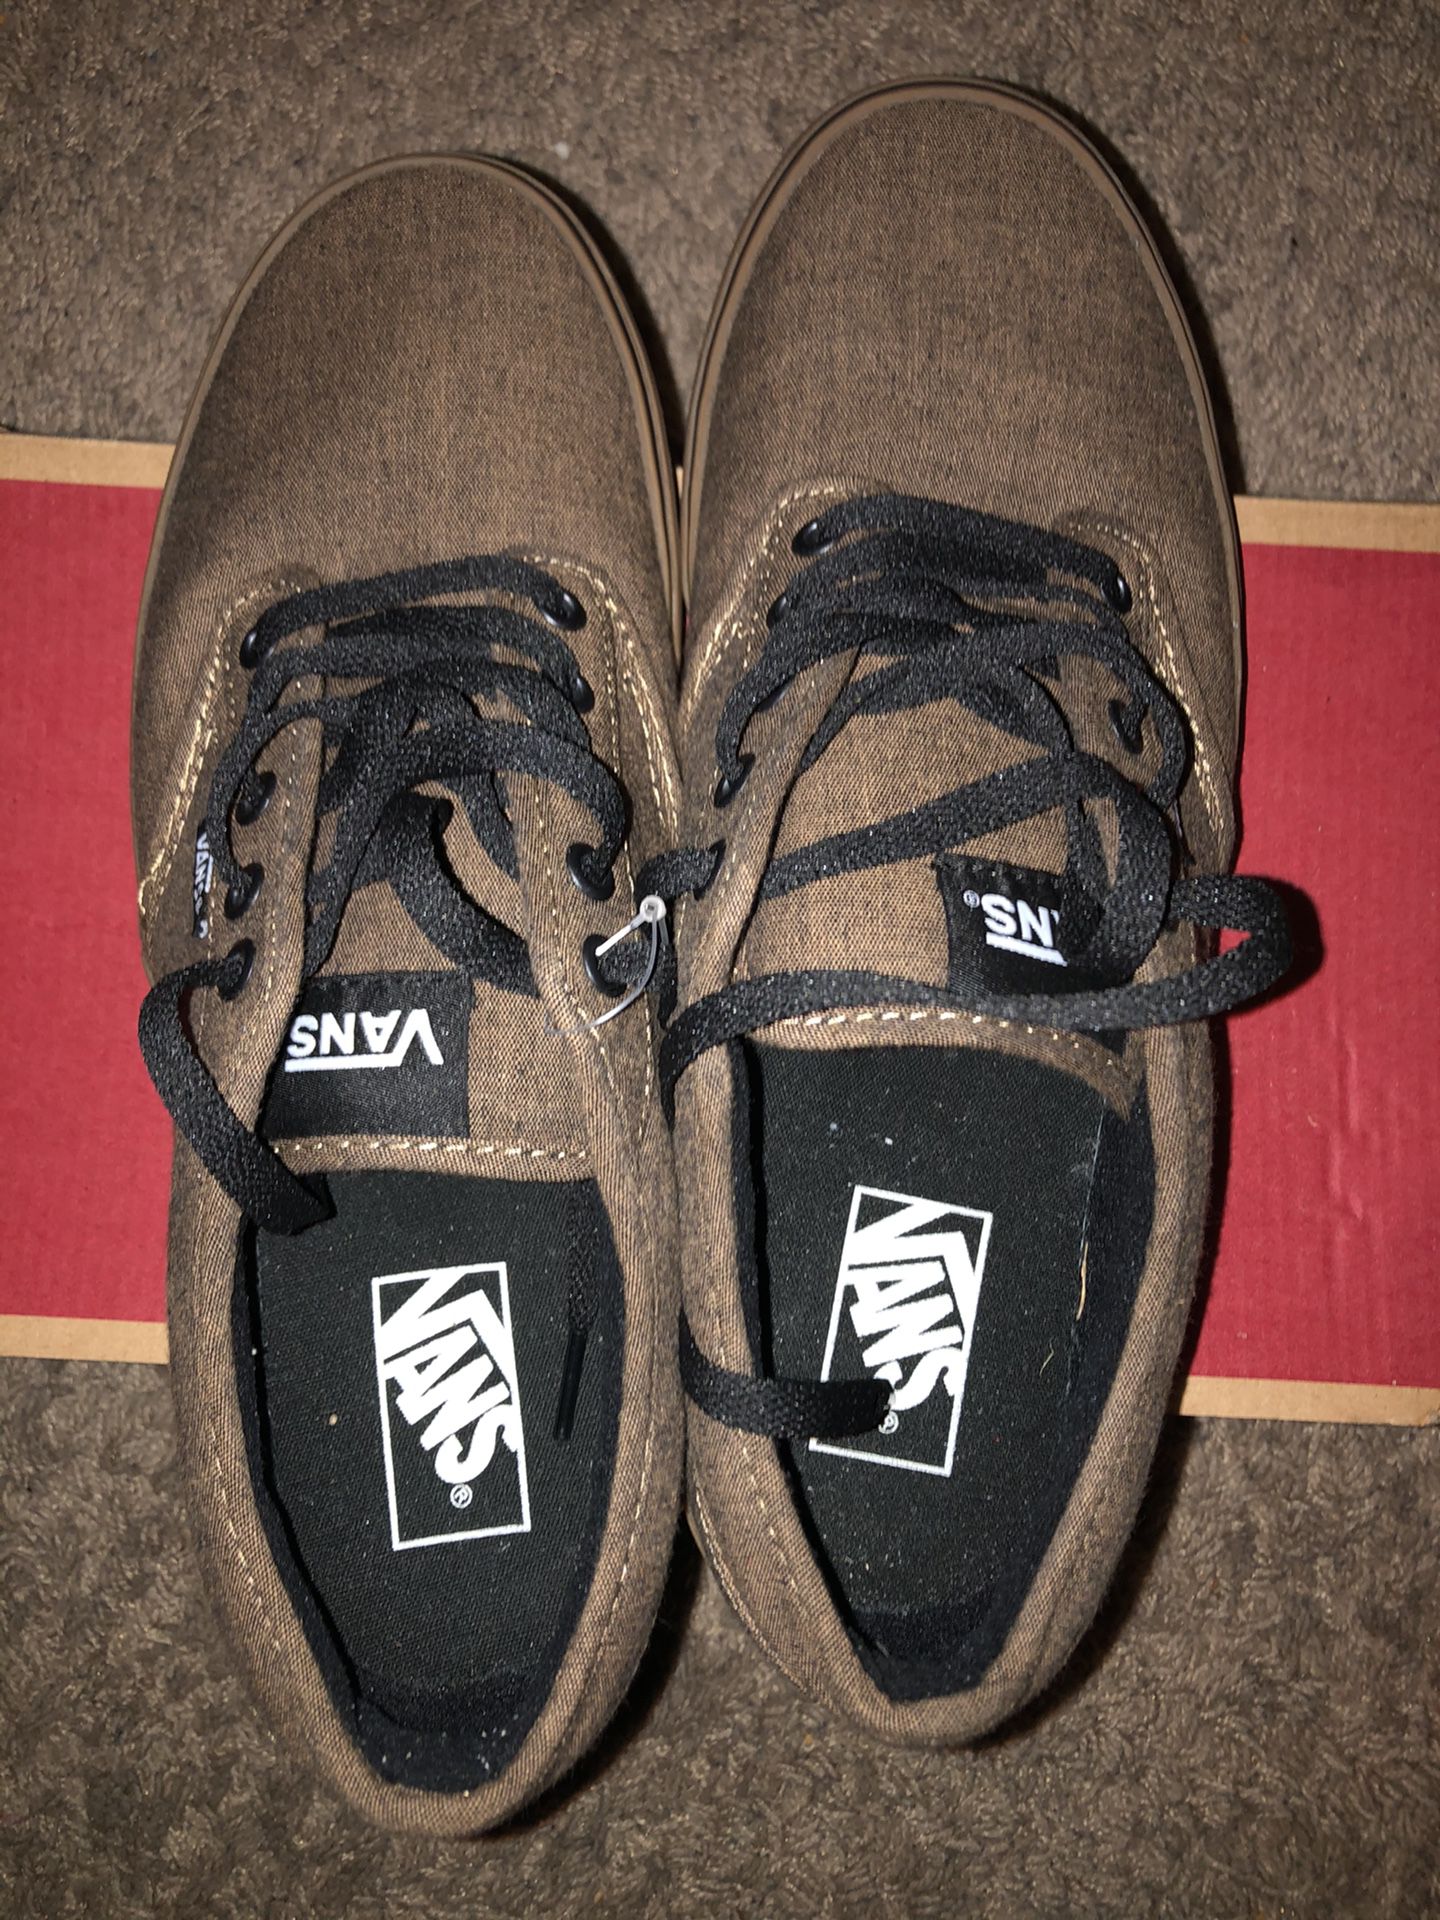 Vans new never used before